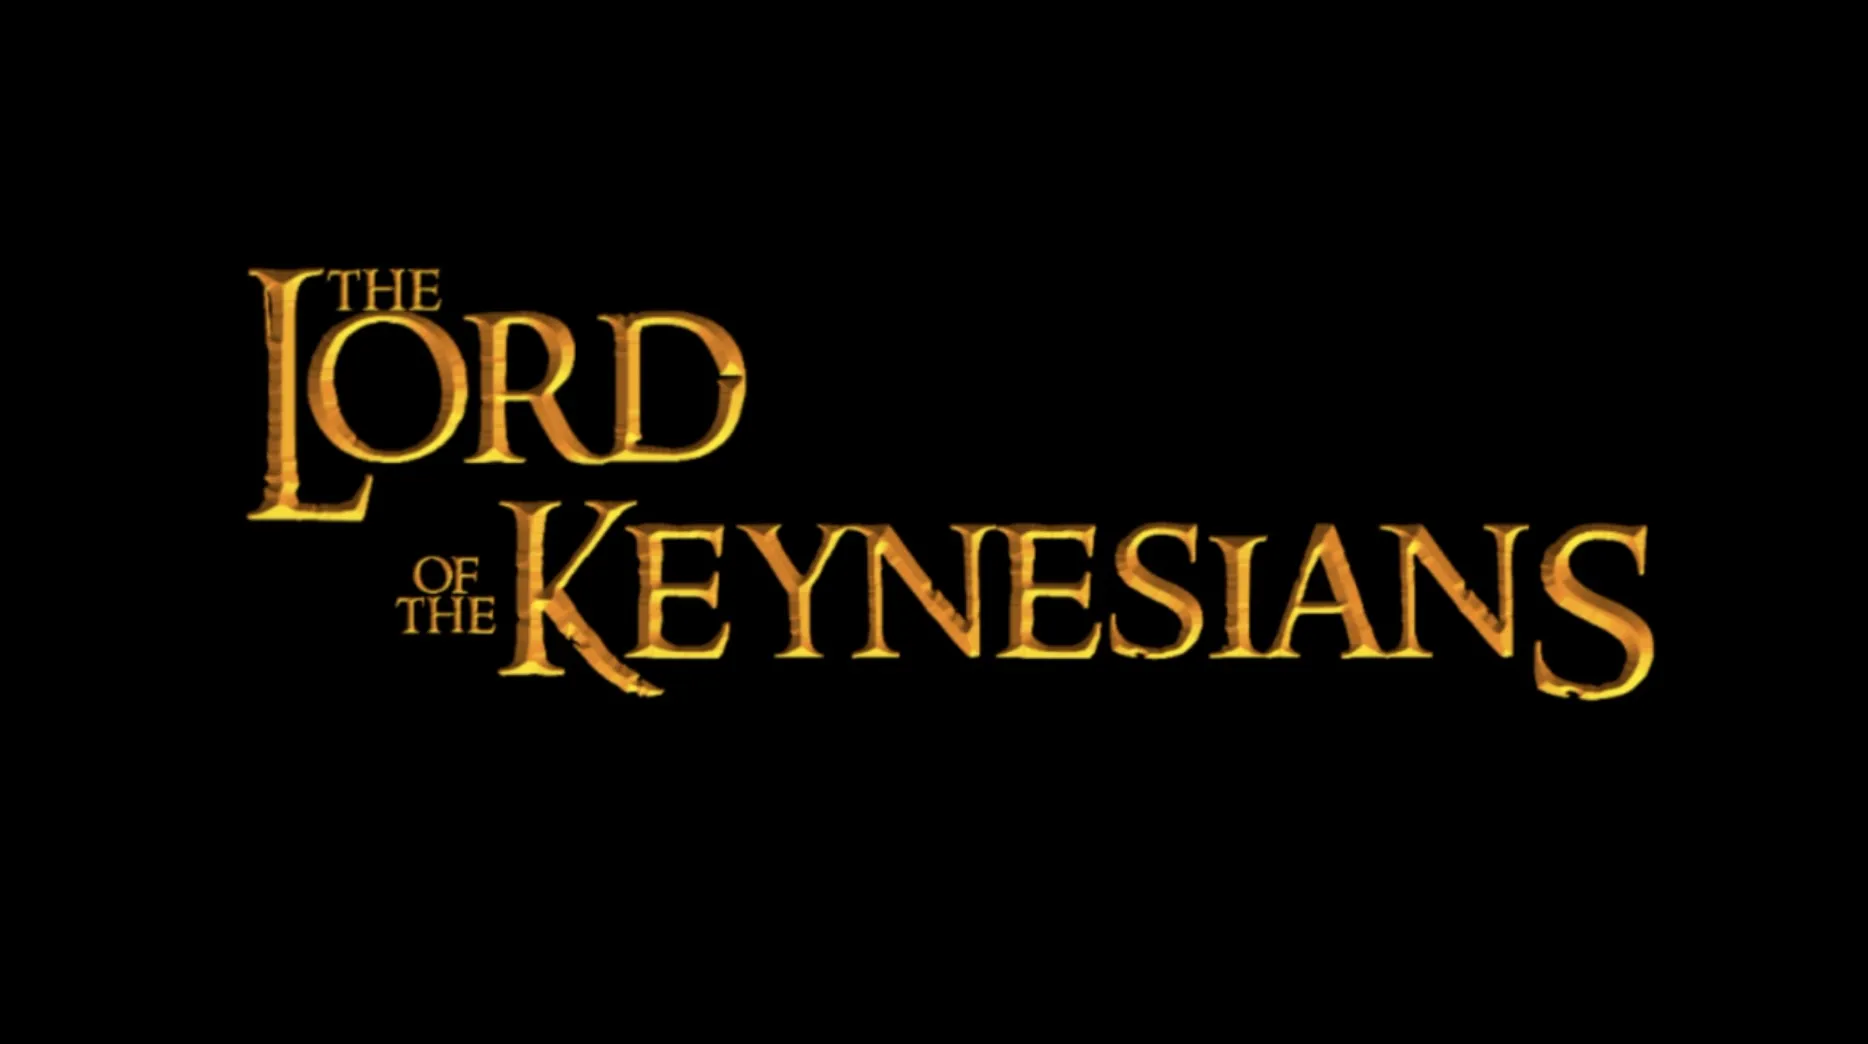 The Lord of the Keynesians